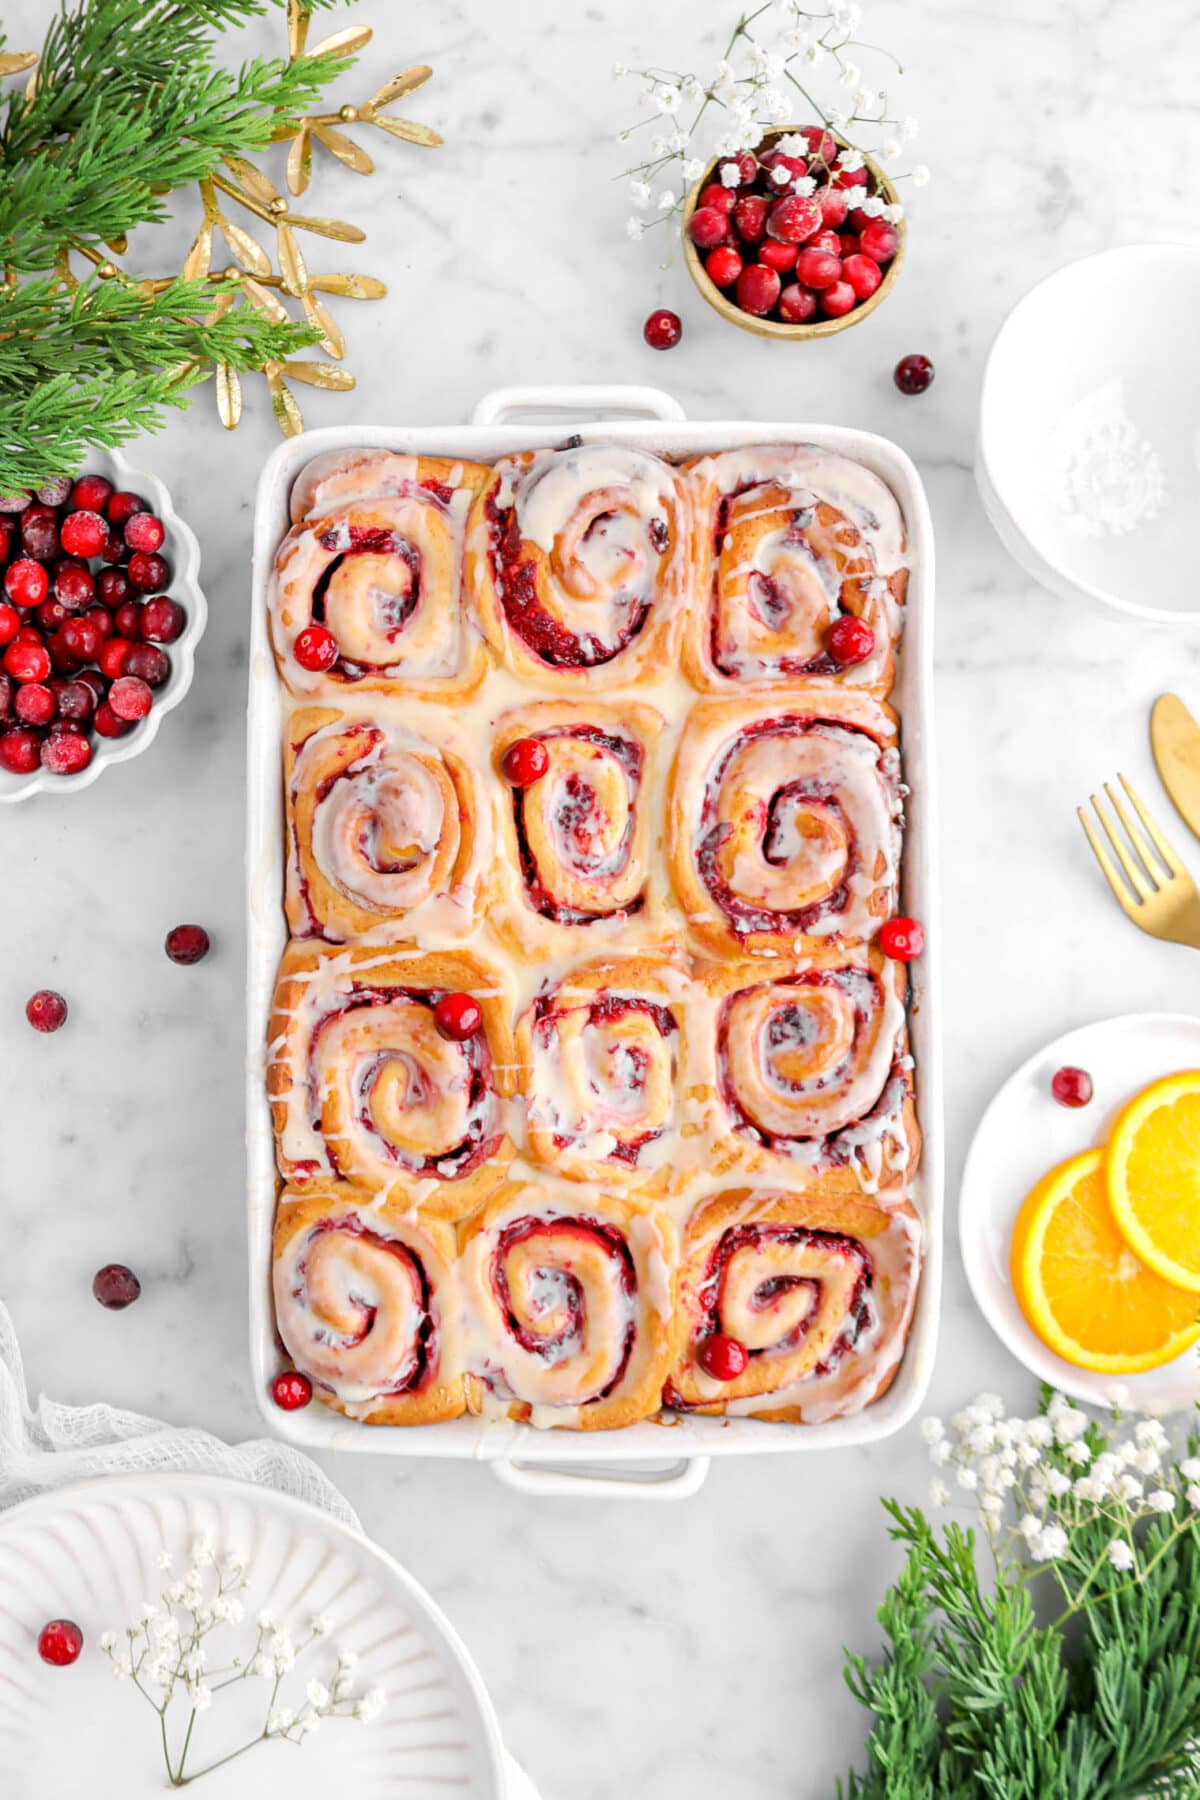 cranberry sweet rolls in rectangular casserole with cranberries around, a plate of orange slices, and christmas greenery around.